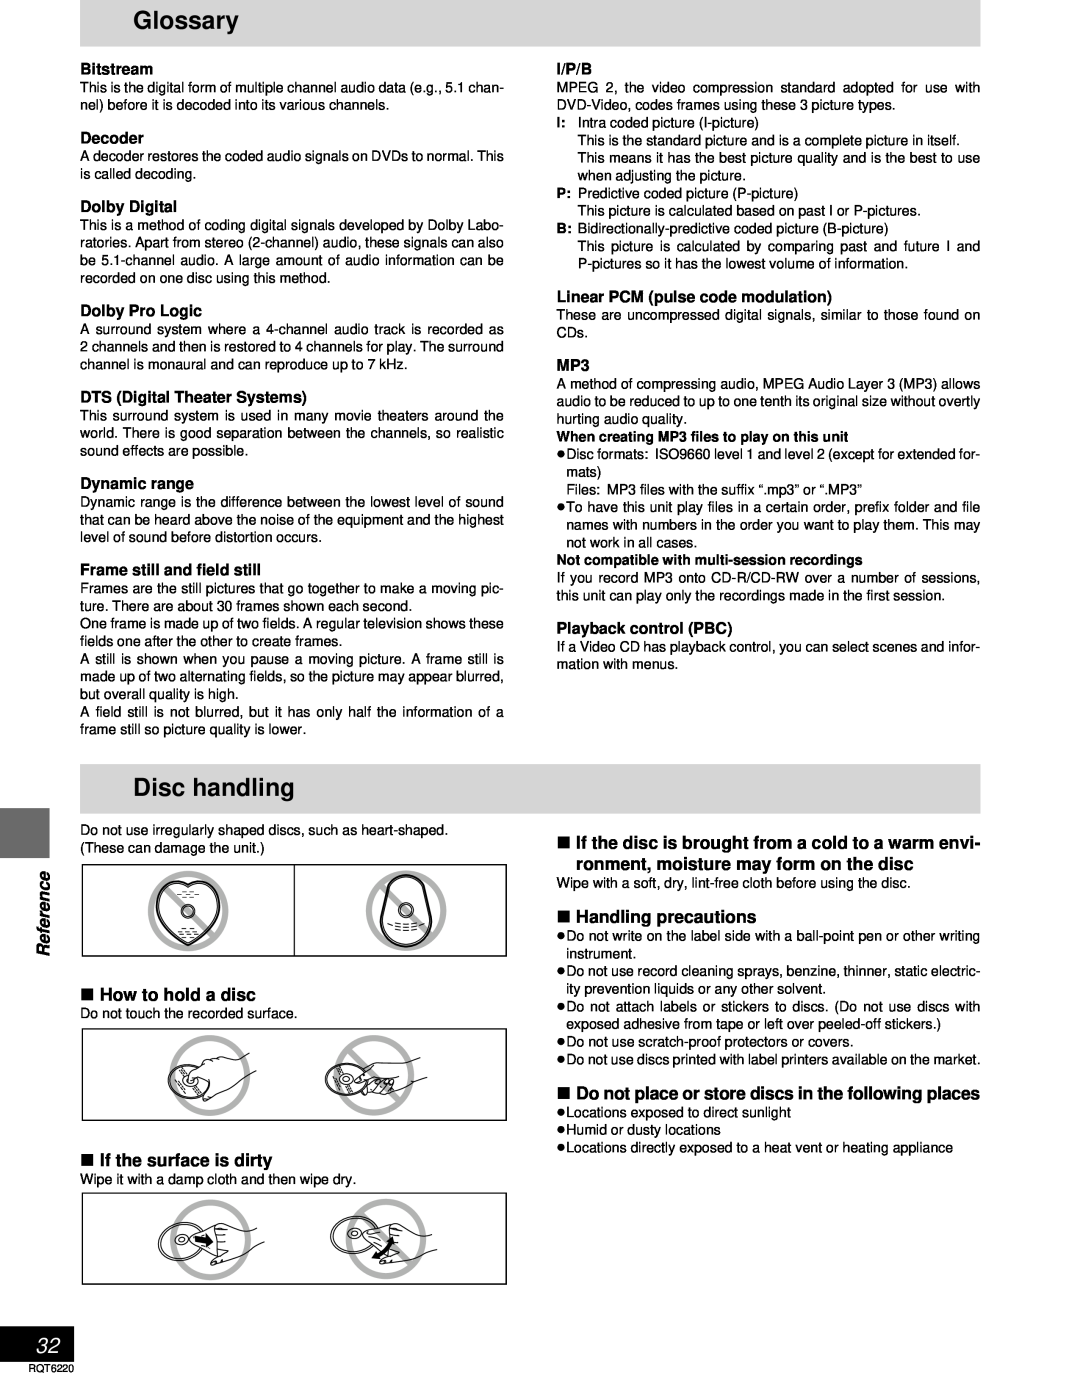 Panasonic SC-DM3 Glossary, Disc handling, Reference, How to hold a disc, If the surface is dirty, ∫Handling precautions 